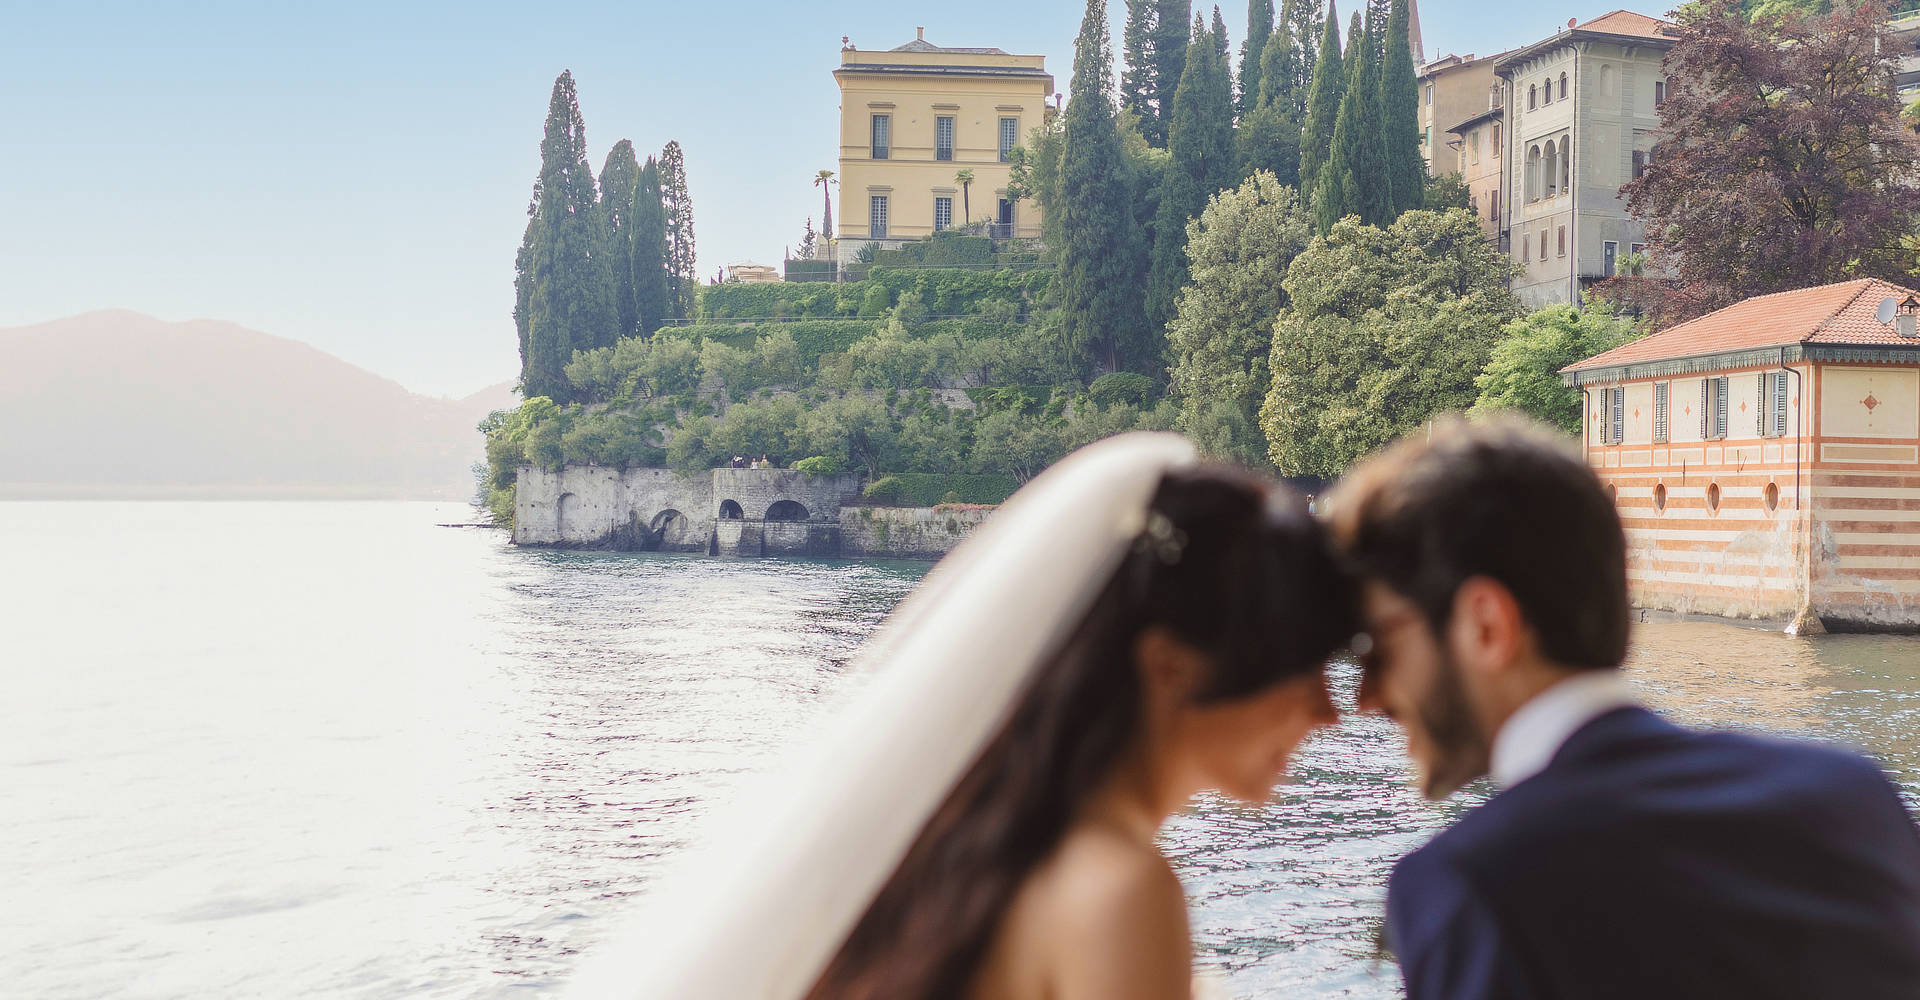 Bride and groom kiss on a boat in front of a very luxury house at lake Como